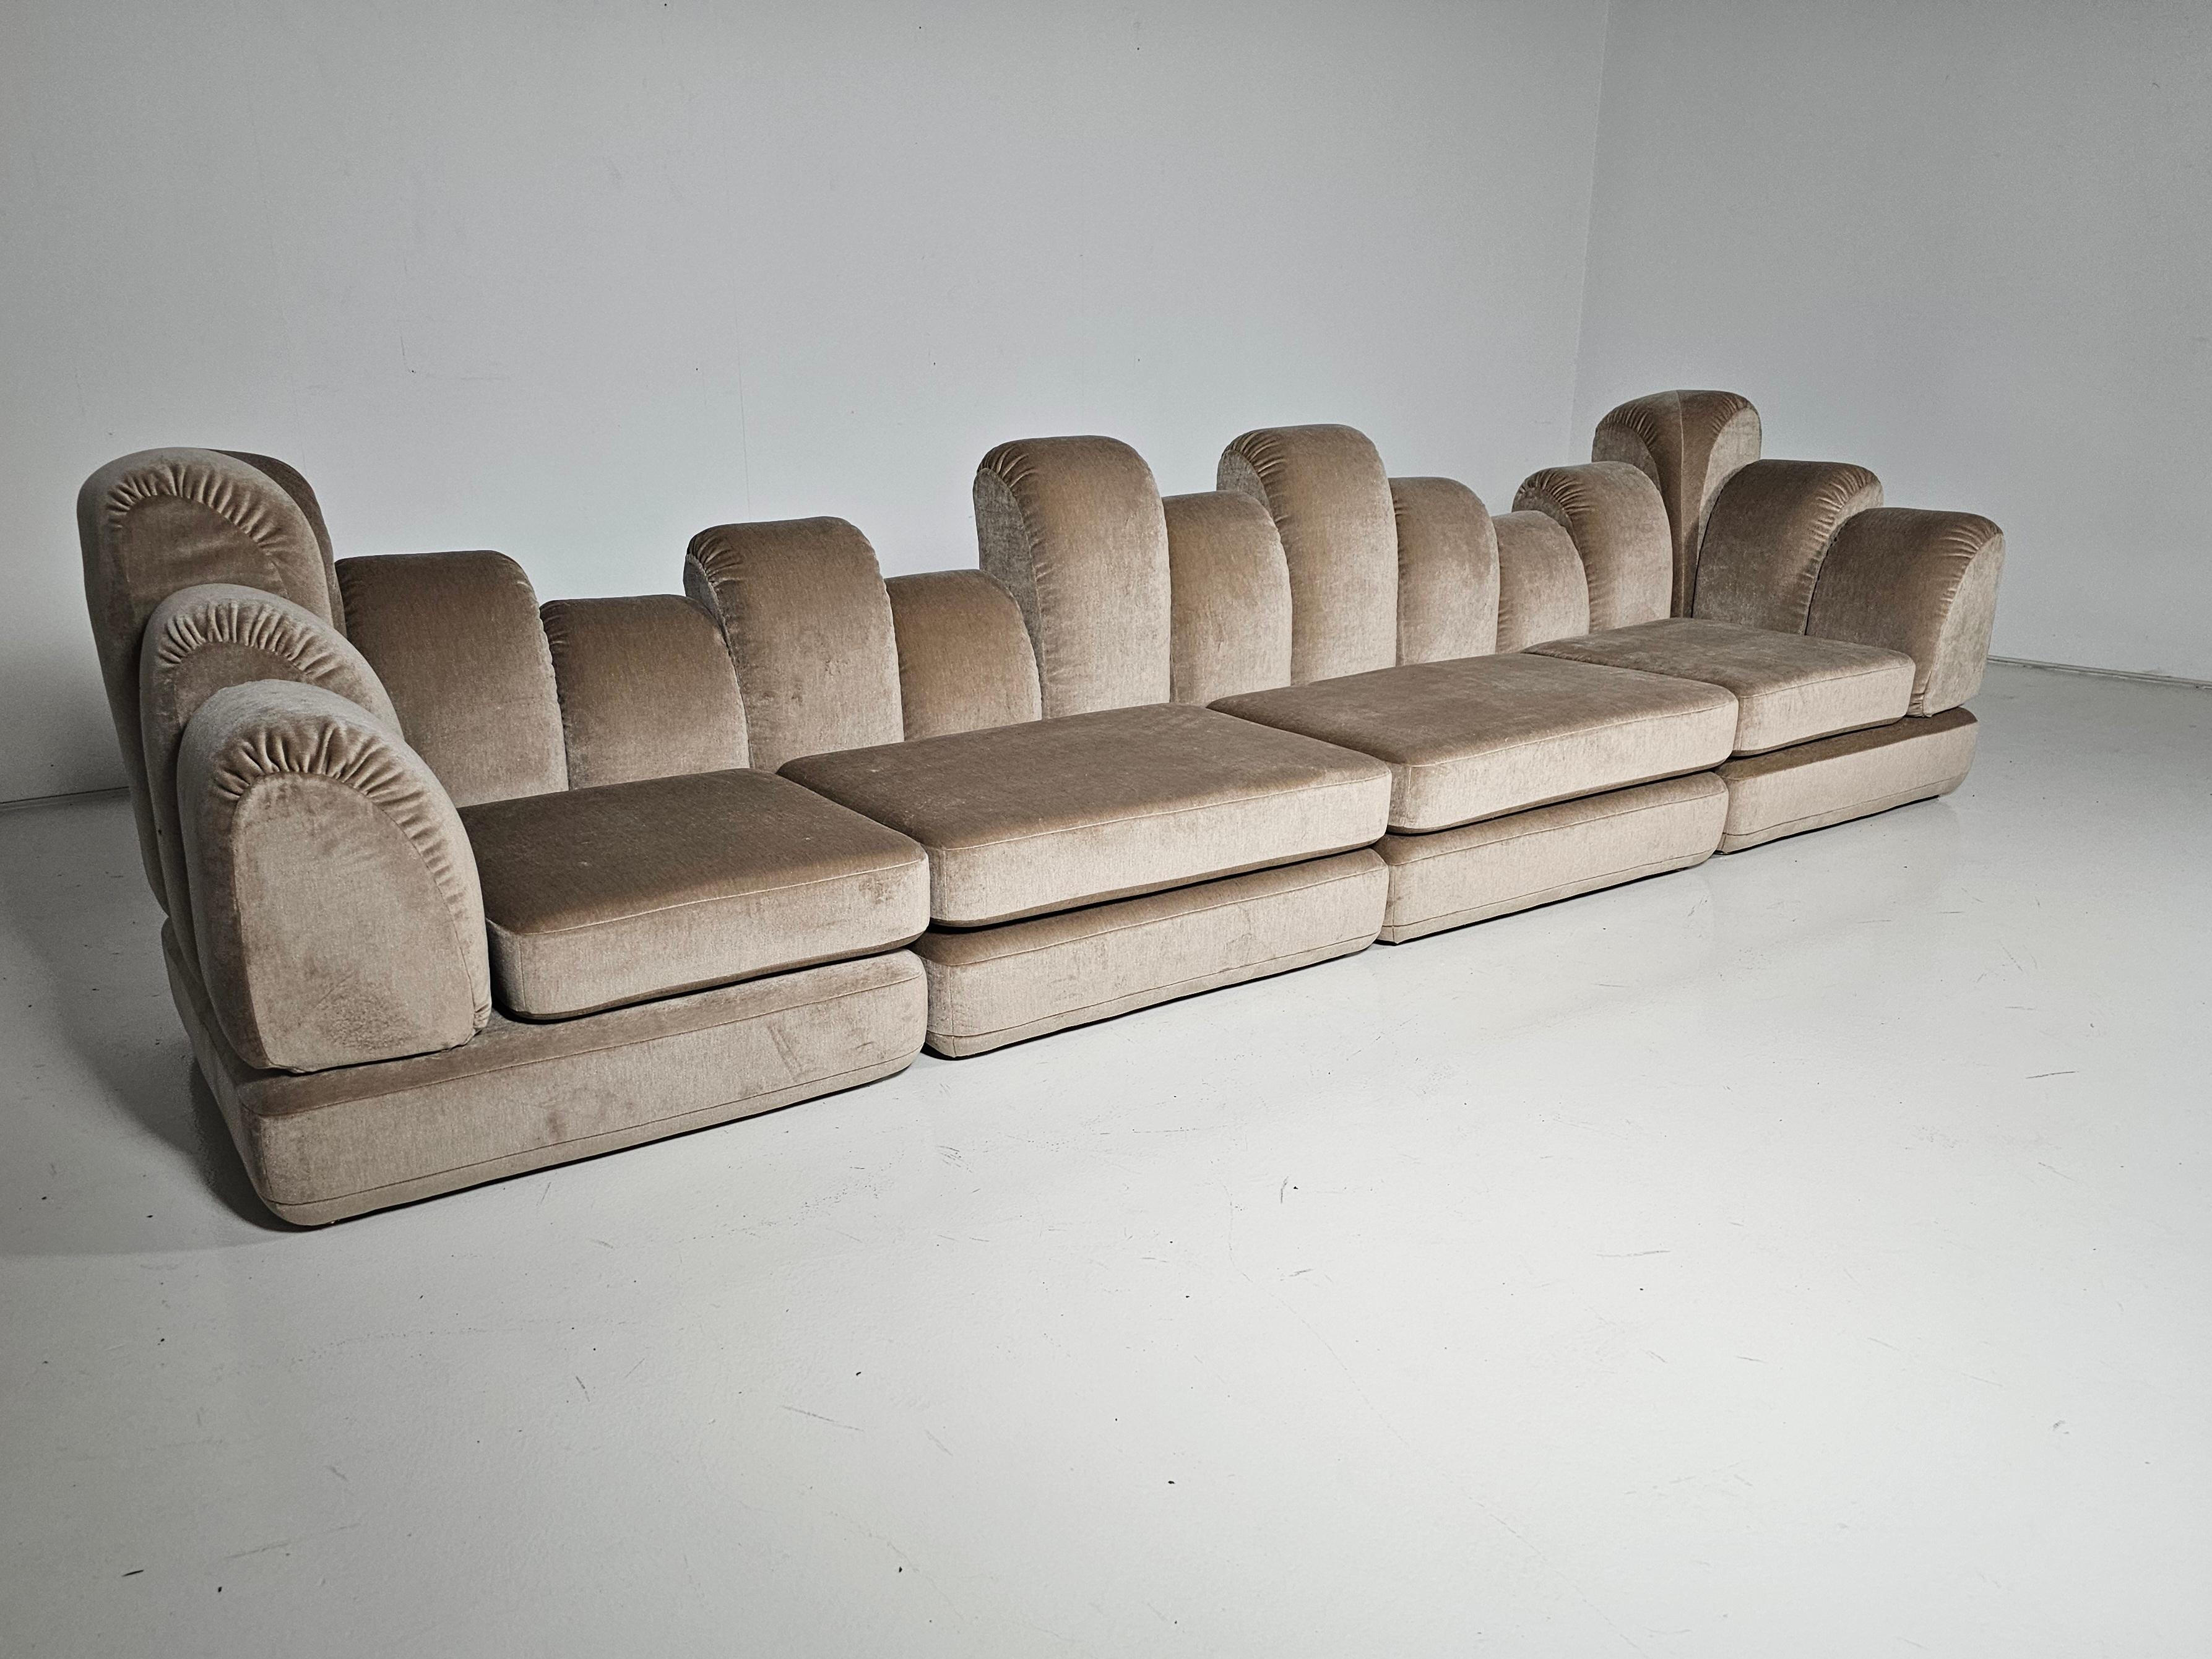 Hans Hopfer 'Dromadaire' Sectional Sofa in Mohair wool, Roche Bobois, 1970

Sectional sofa designed by Hans Hopfer and manufactured by Roche Bobois in France circa 1970. A very rare and collectible modular couch, reupholstered in mohair velvet, with